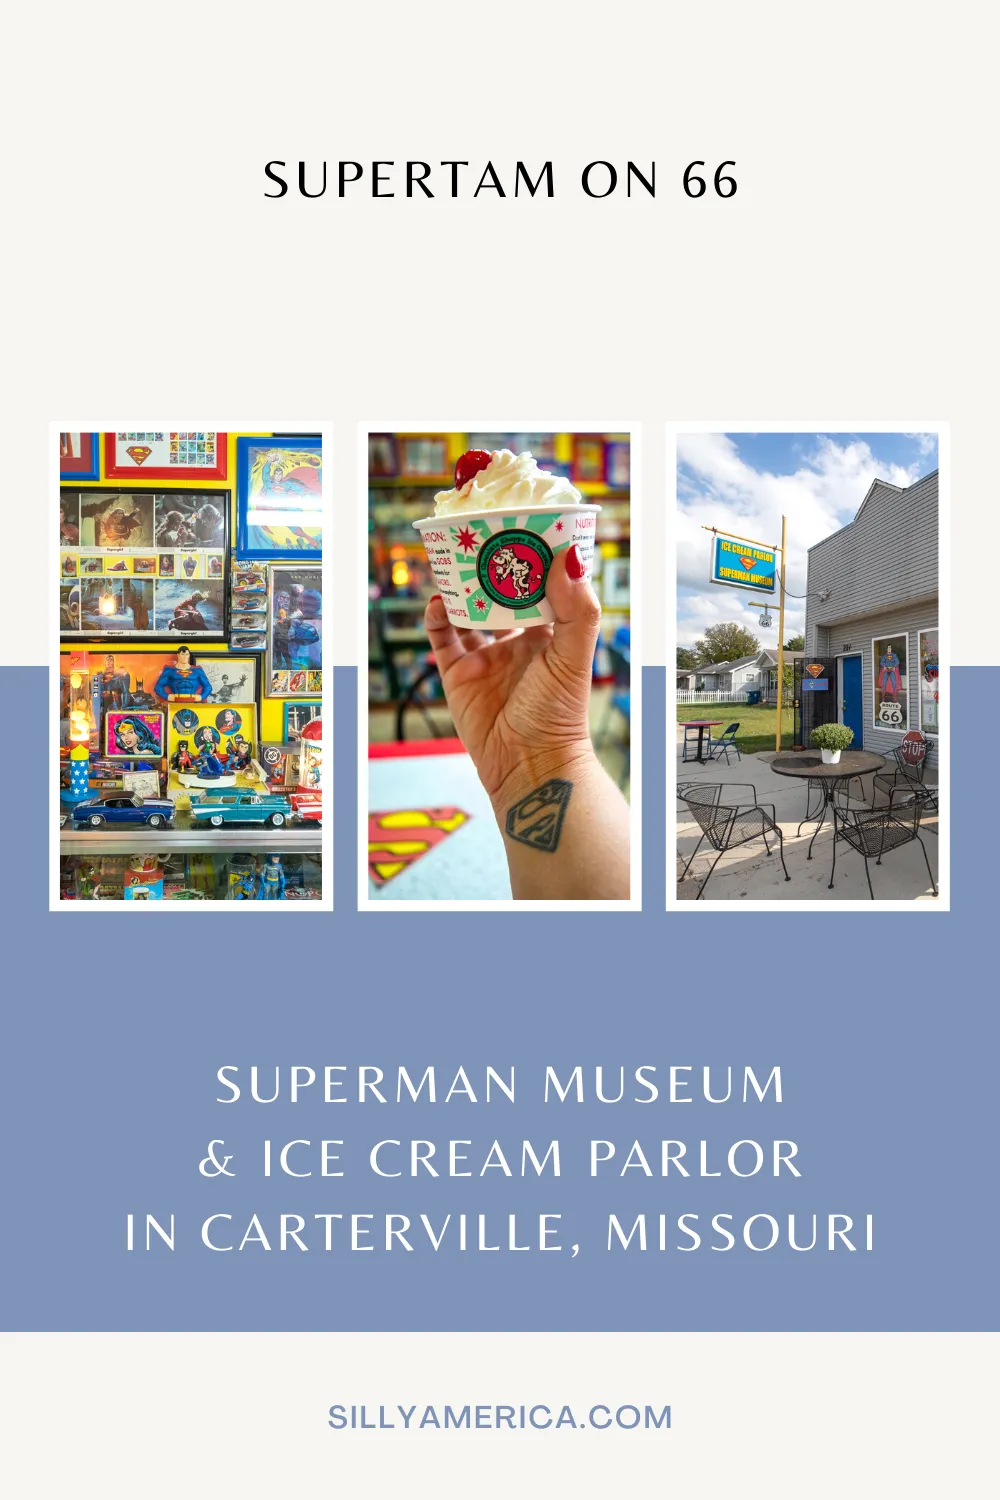 SuperTam on 66 in Carterville, Missouri is an ice cream parlor and Superman Museum featuring themed desserts and Man of Steel memorabilia on Route 66. Visit this weird roadside attraction, ice cream shop, and museum on your Missouri road trip and add it to your Route 66 travel itinerary. #Superman  #RoadTrips #RoadTripStop #Route66 #Route66RoadTrip #MissouriRoute66 #Missouri #MissouriRoadTrip #MissouriRoadsideAttractions #RoadsideAttractions #RoadsideAttraction #RoadsideAmerica #RoadTrip #Elvis